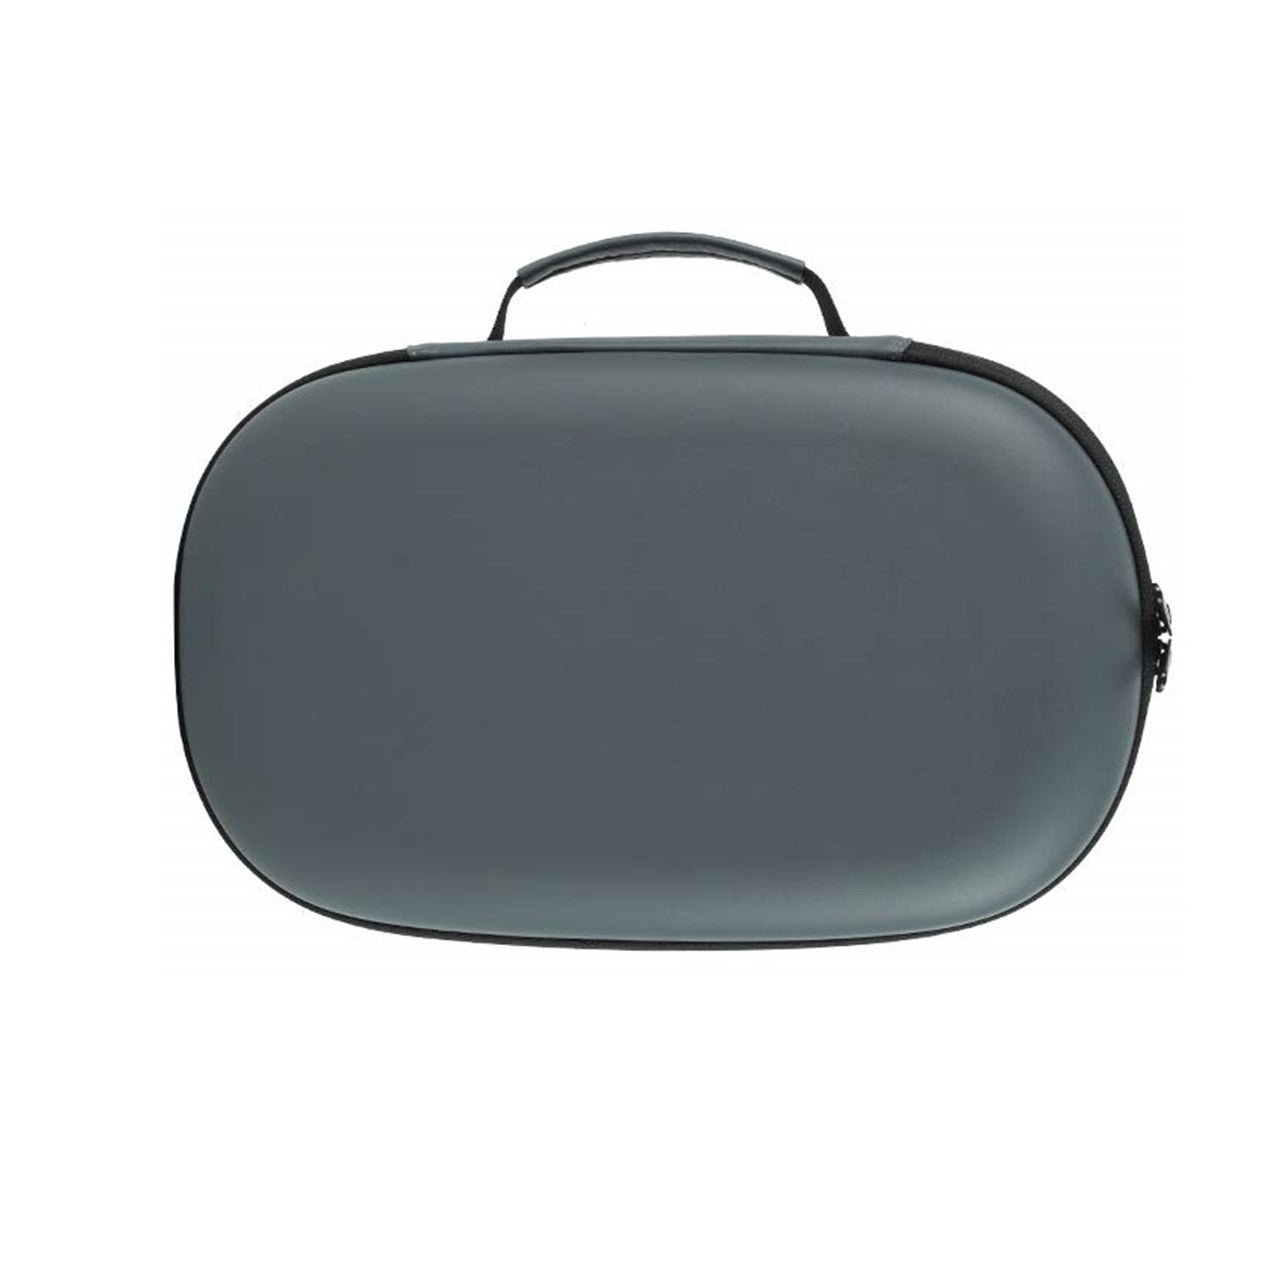 Quest 2 Carrying Case